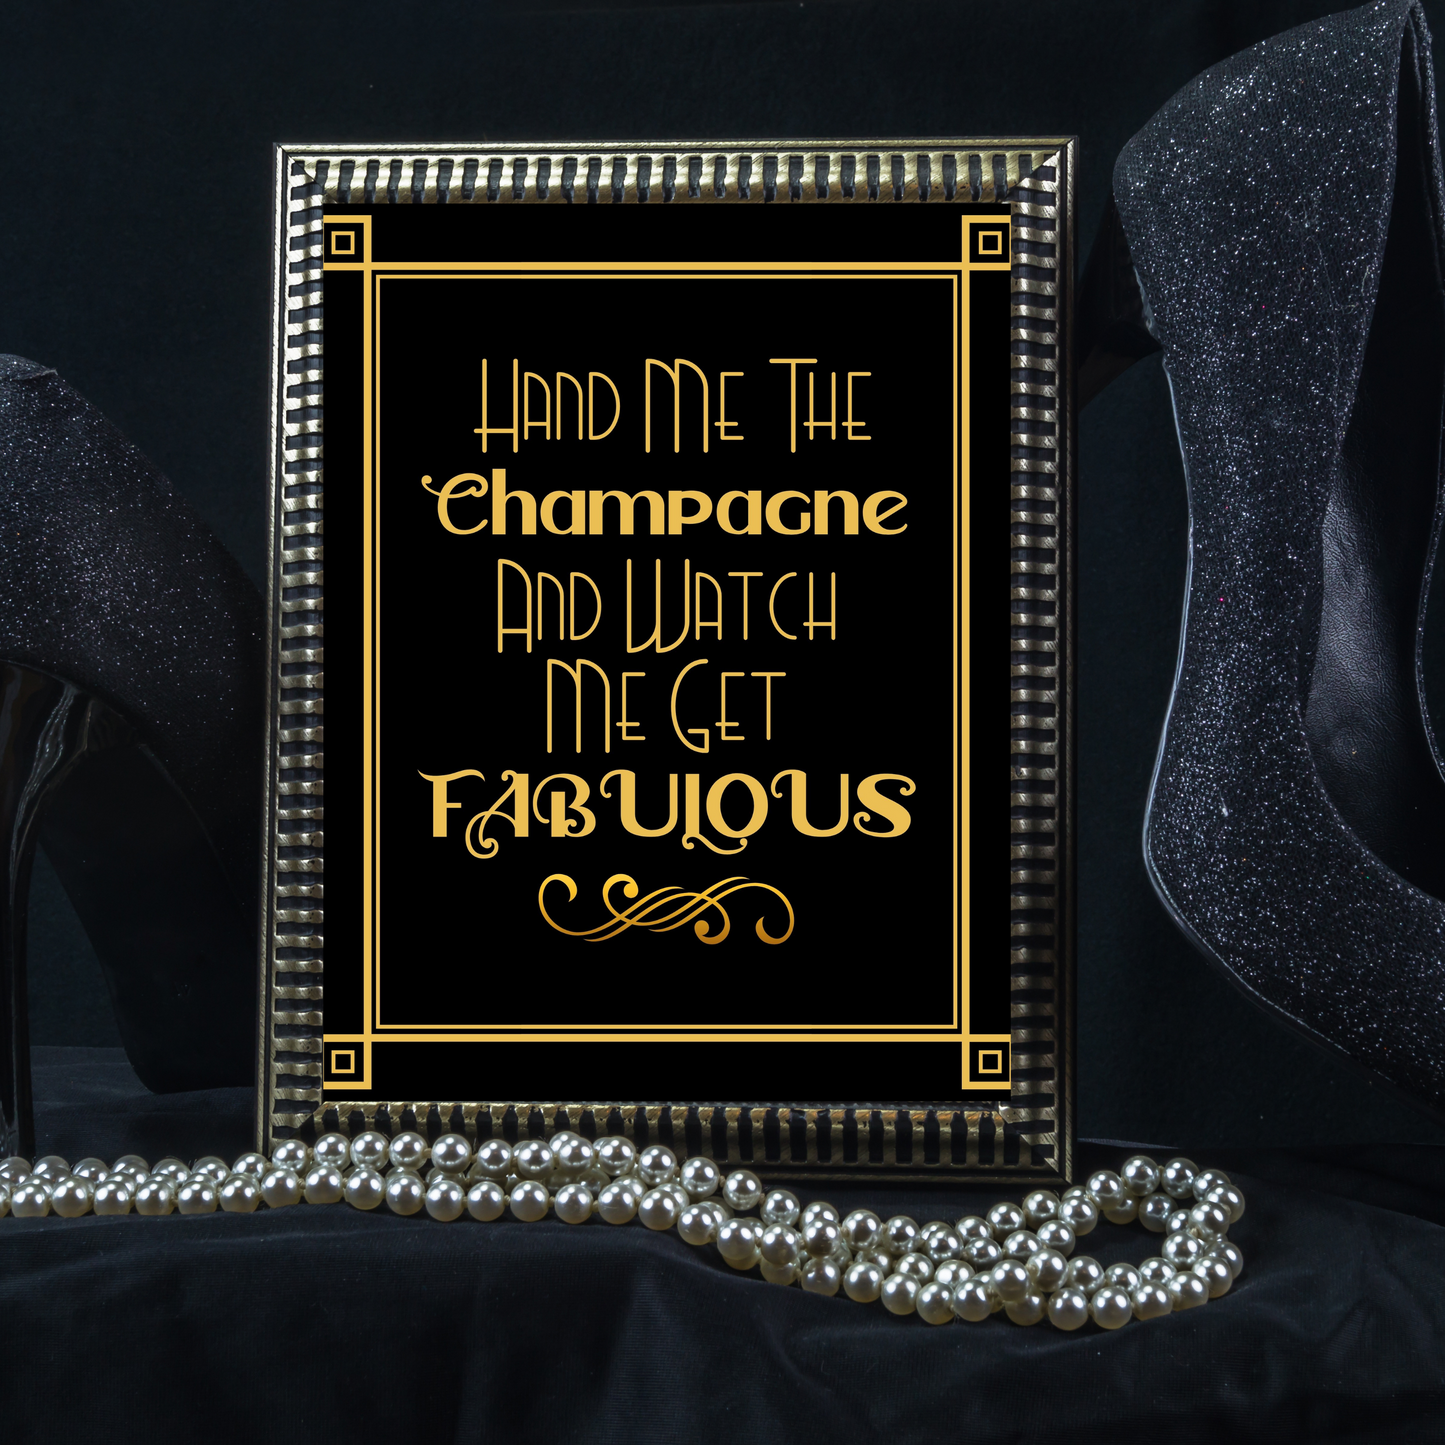 Set Of 6 Printable Party Signs For Great Gatsby or Roaring 20's Party Or Wedding, Black & Gold, Champagne Theme, Printable Party Decor